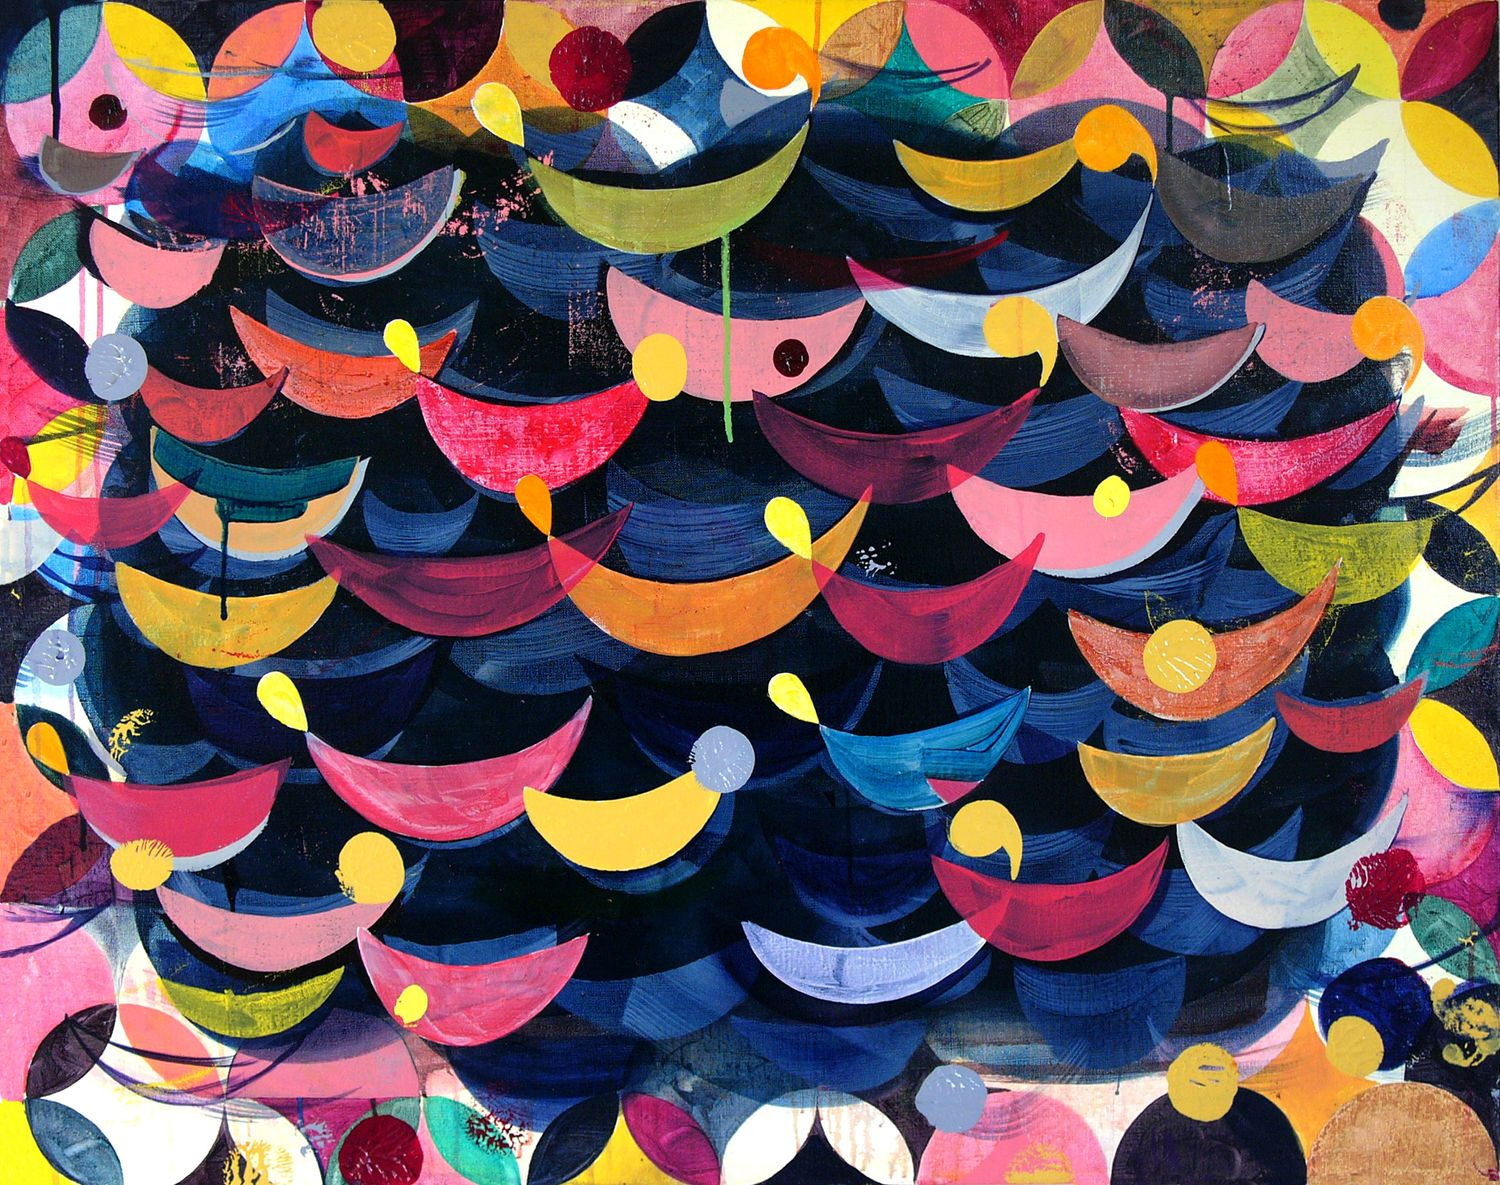 Origami Painters Hat Colour A Kind Of Bliss Exhibition At St Marylebone Crypt In London